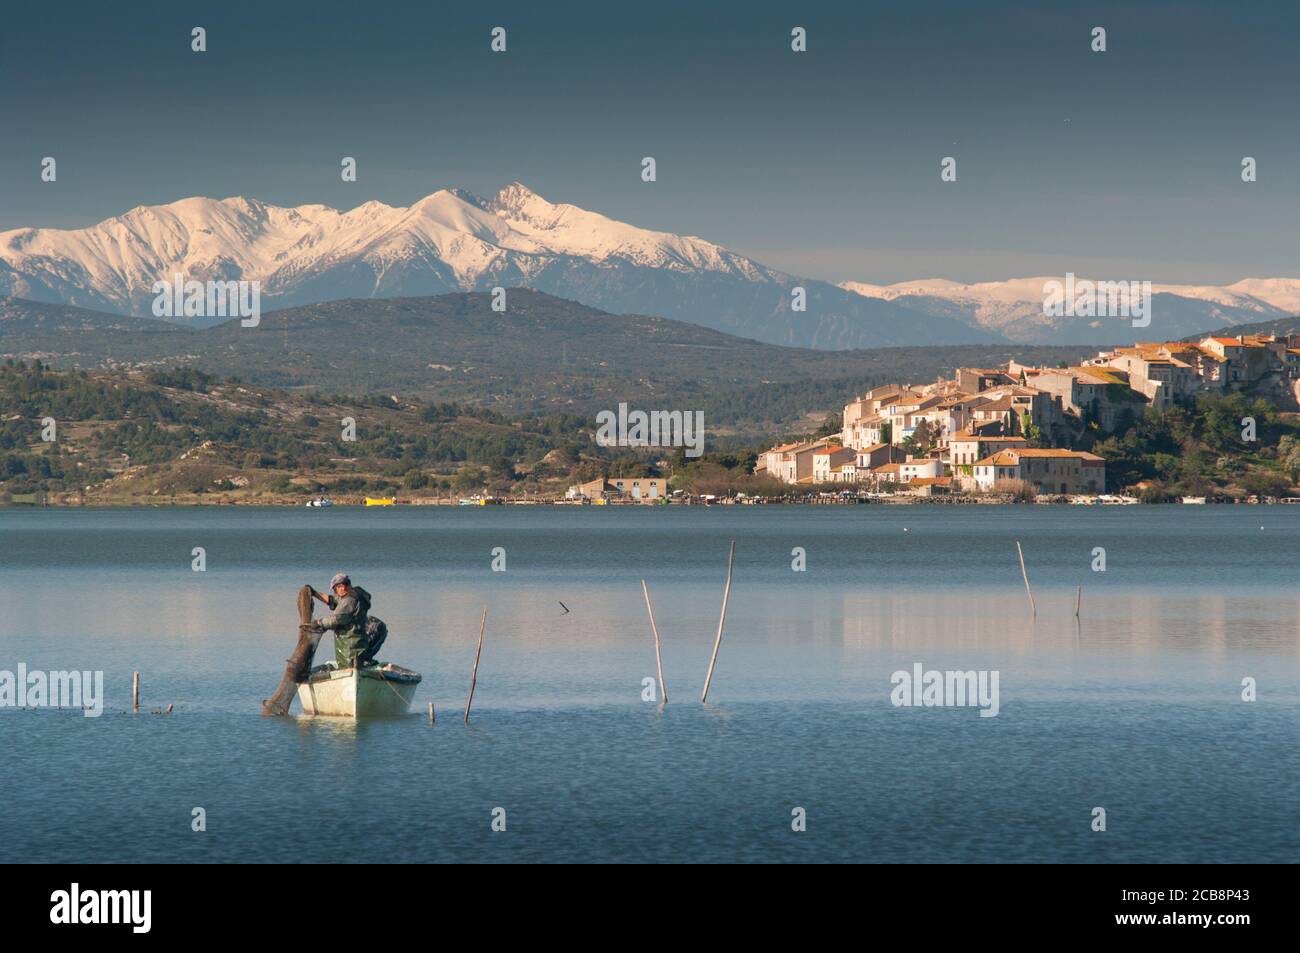 Aude, Mediterranean France: On the Étang de Bages, an eel fisherman empties his traps. In the background, Mount Canigou and the eastern Pyrenees Stock Photo